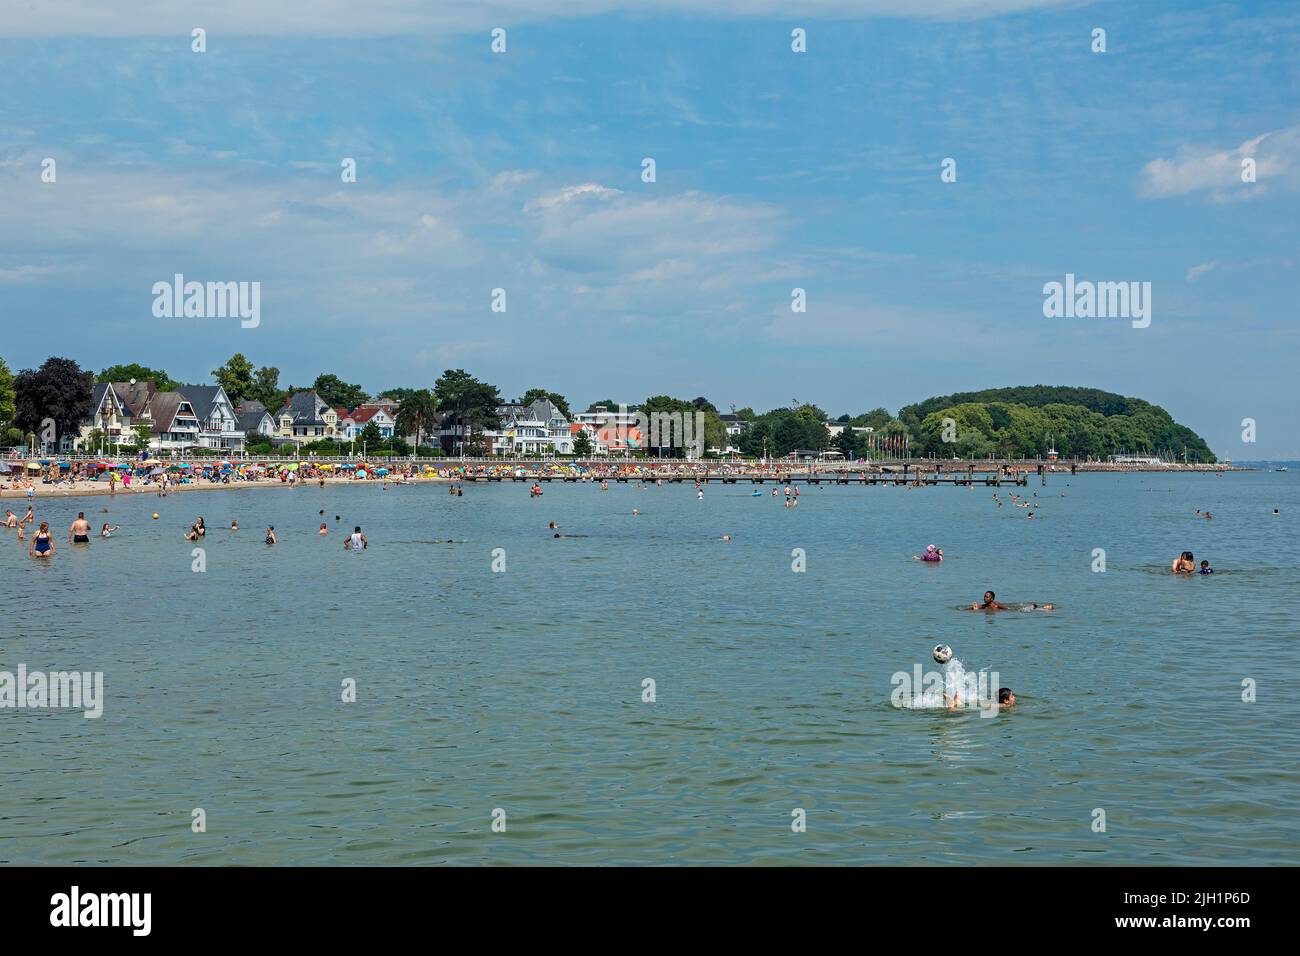 Beach, people in the sea, houses at the seafront, Travemünde, Lübeck, Schleswig-Holstein, Germany Stock Photo